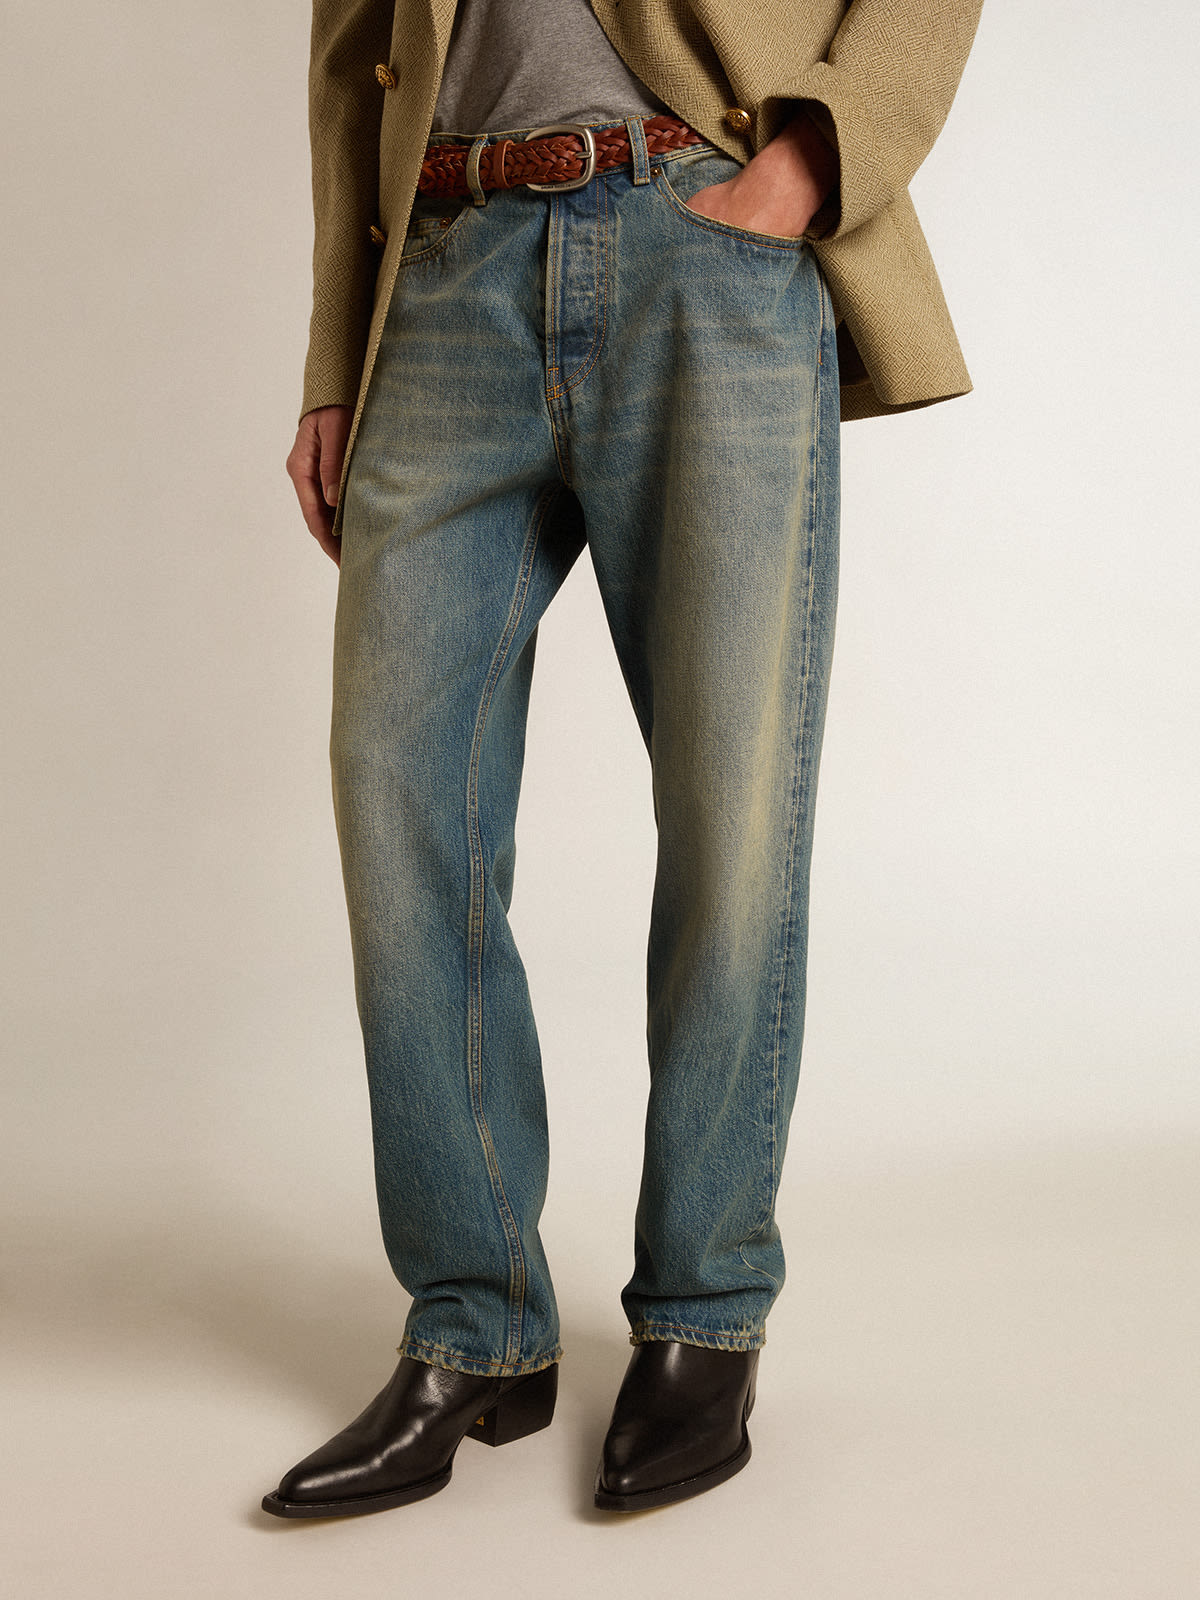 Golden Goose - Blue jeans with a lived-in treatment in 